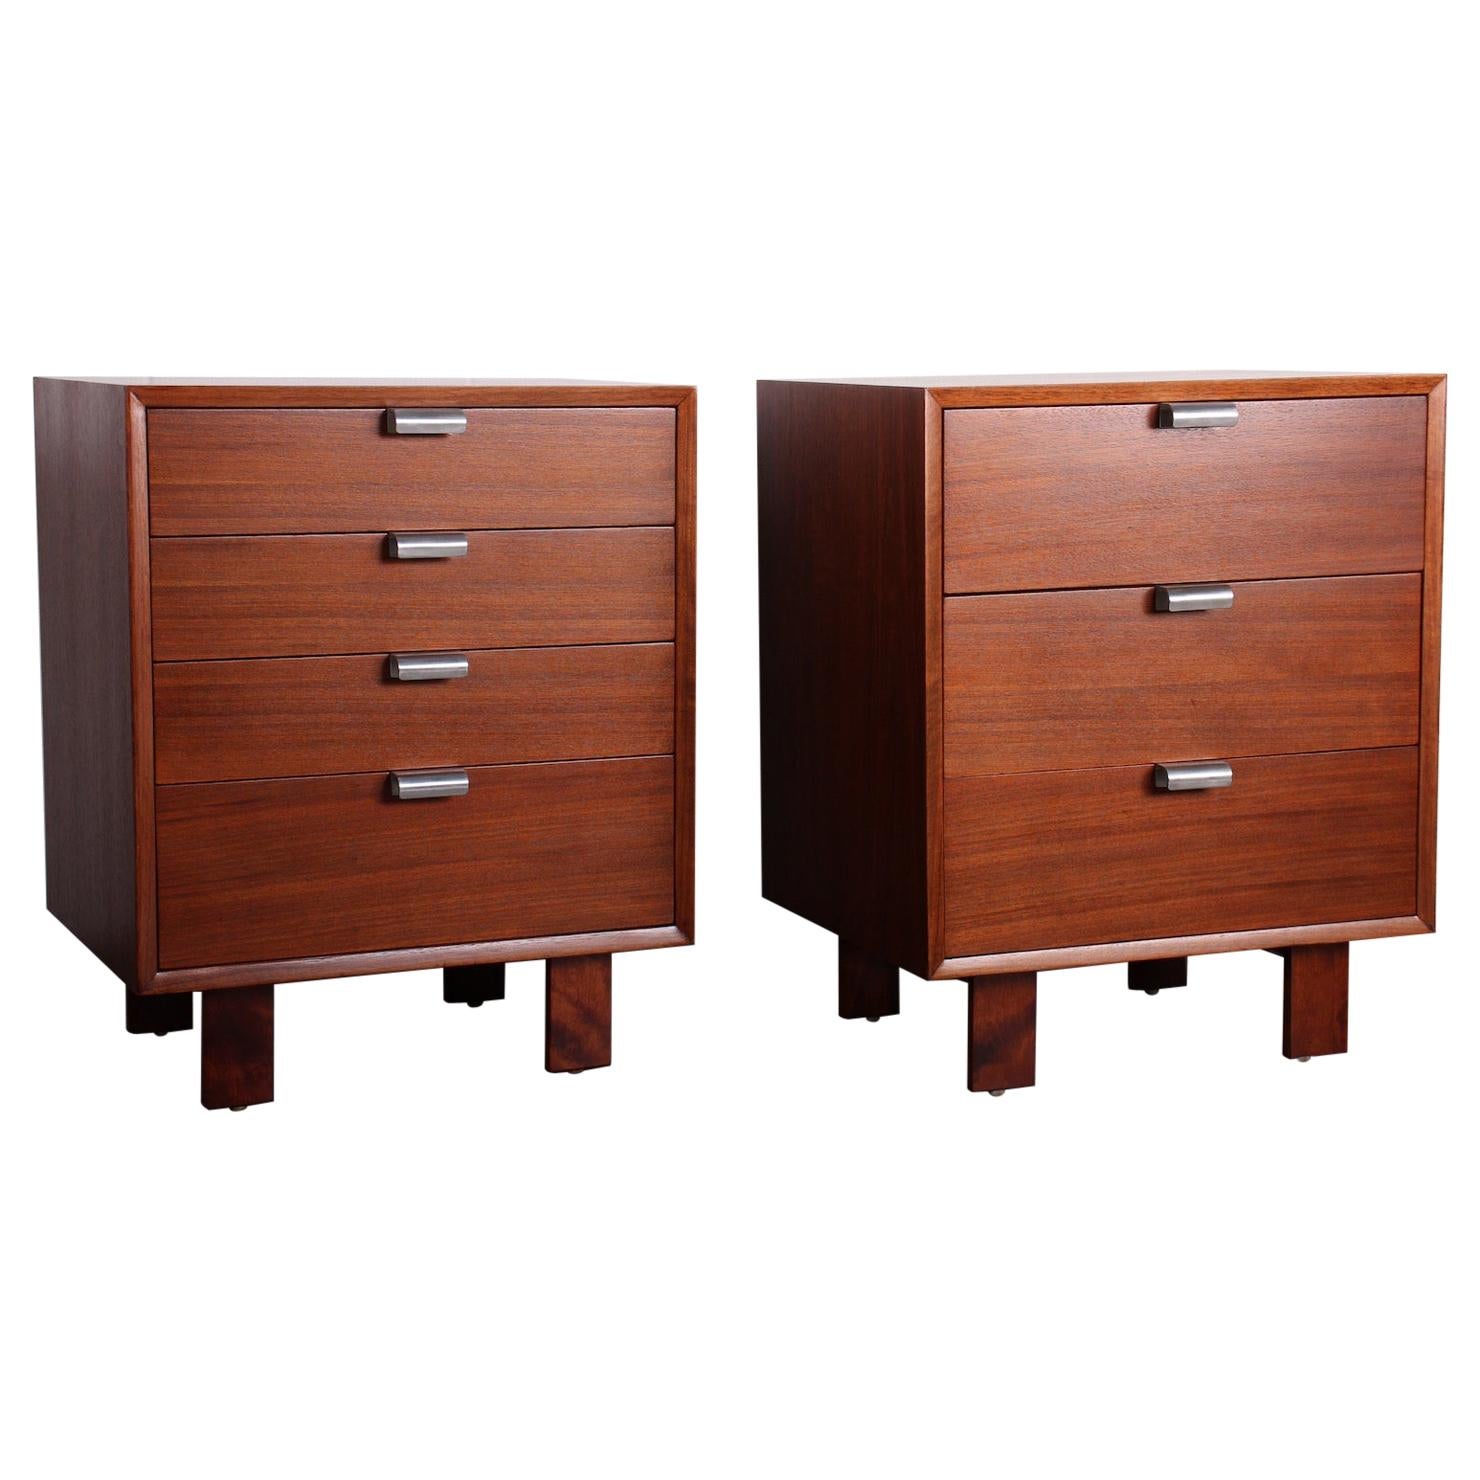 Pair of Nightstands by George Nelson for Herman Miller